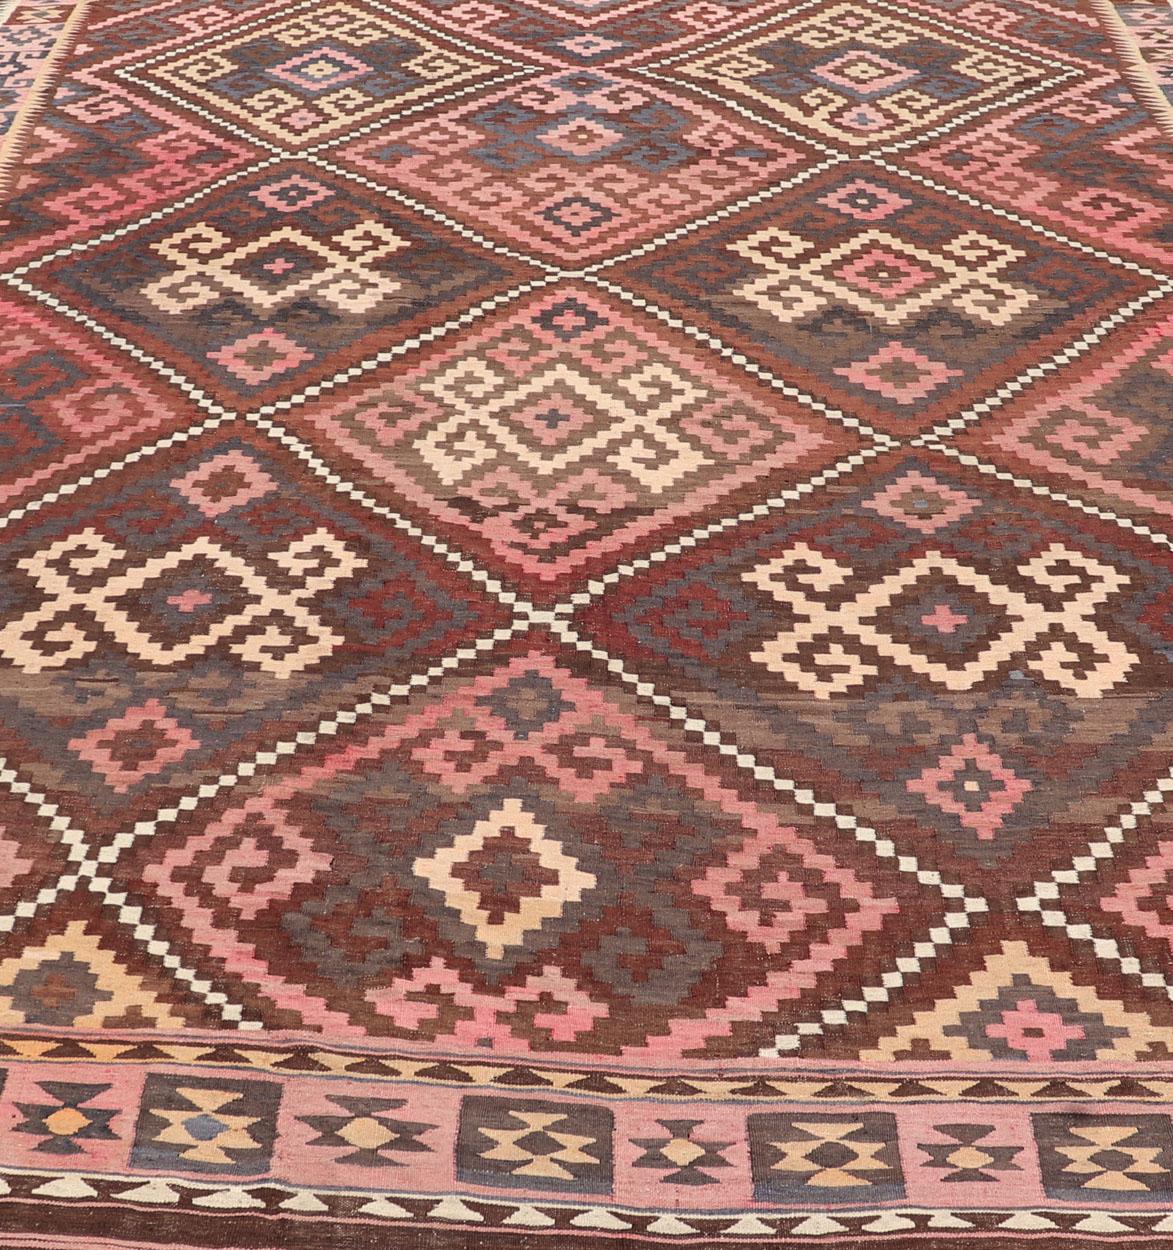 Hand-Woven All-Over Hand Woven Geometric Kilim Diamond Design in Brown, Pink, and Ivory For Sale